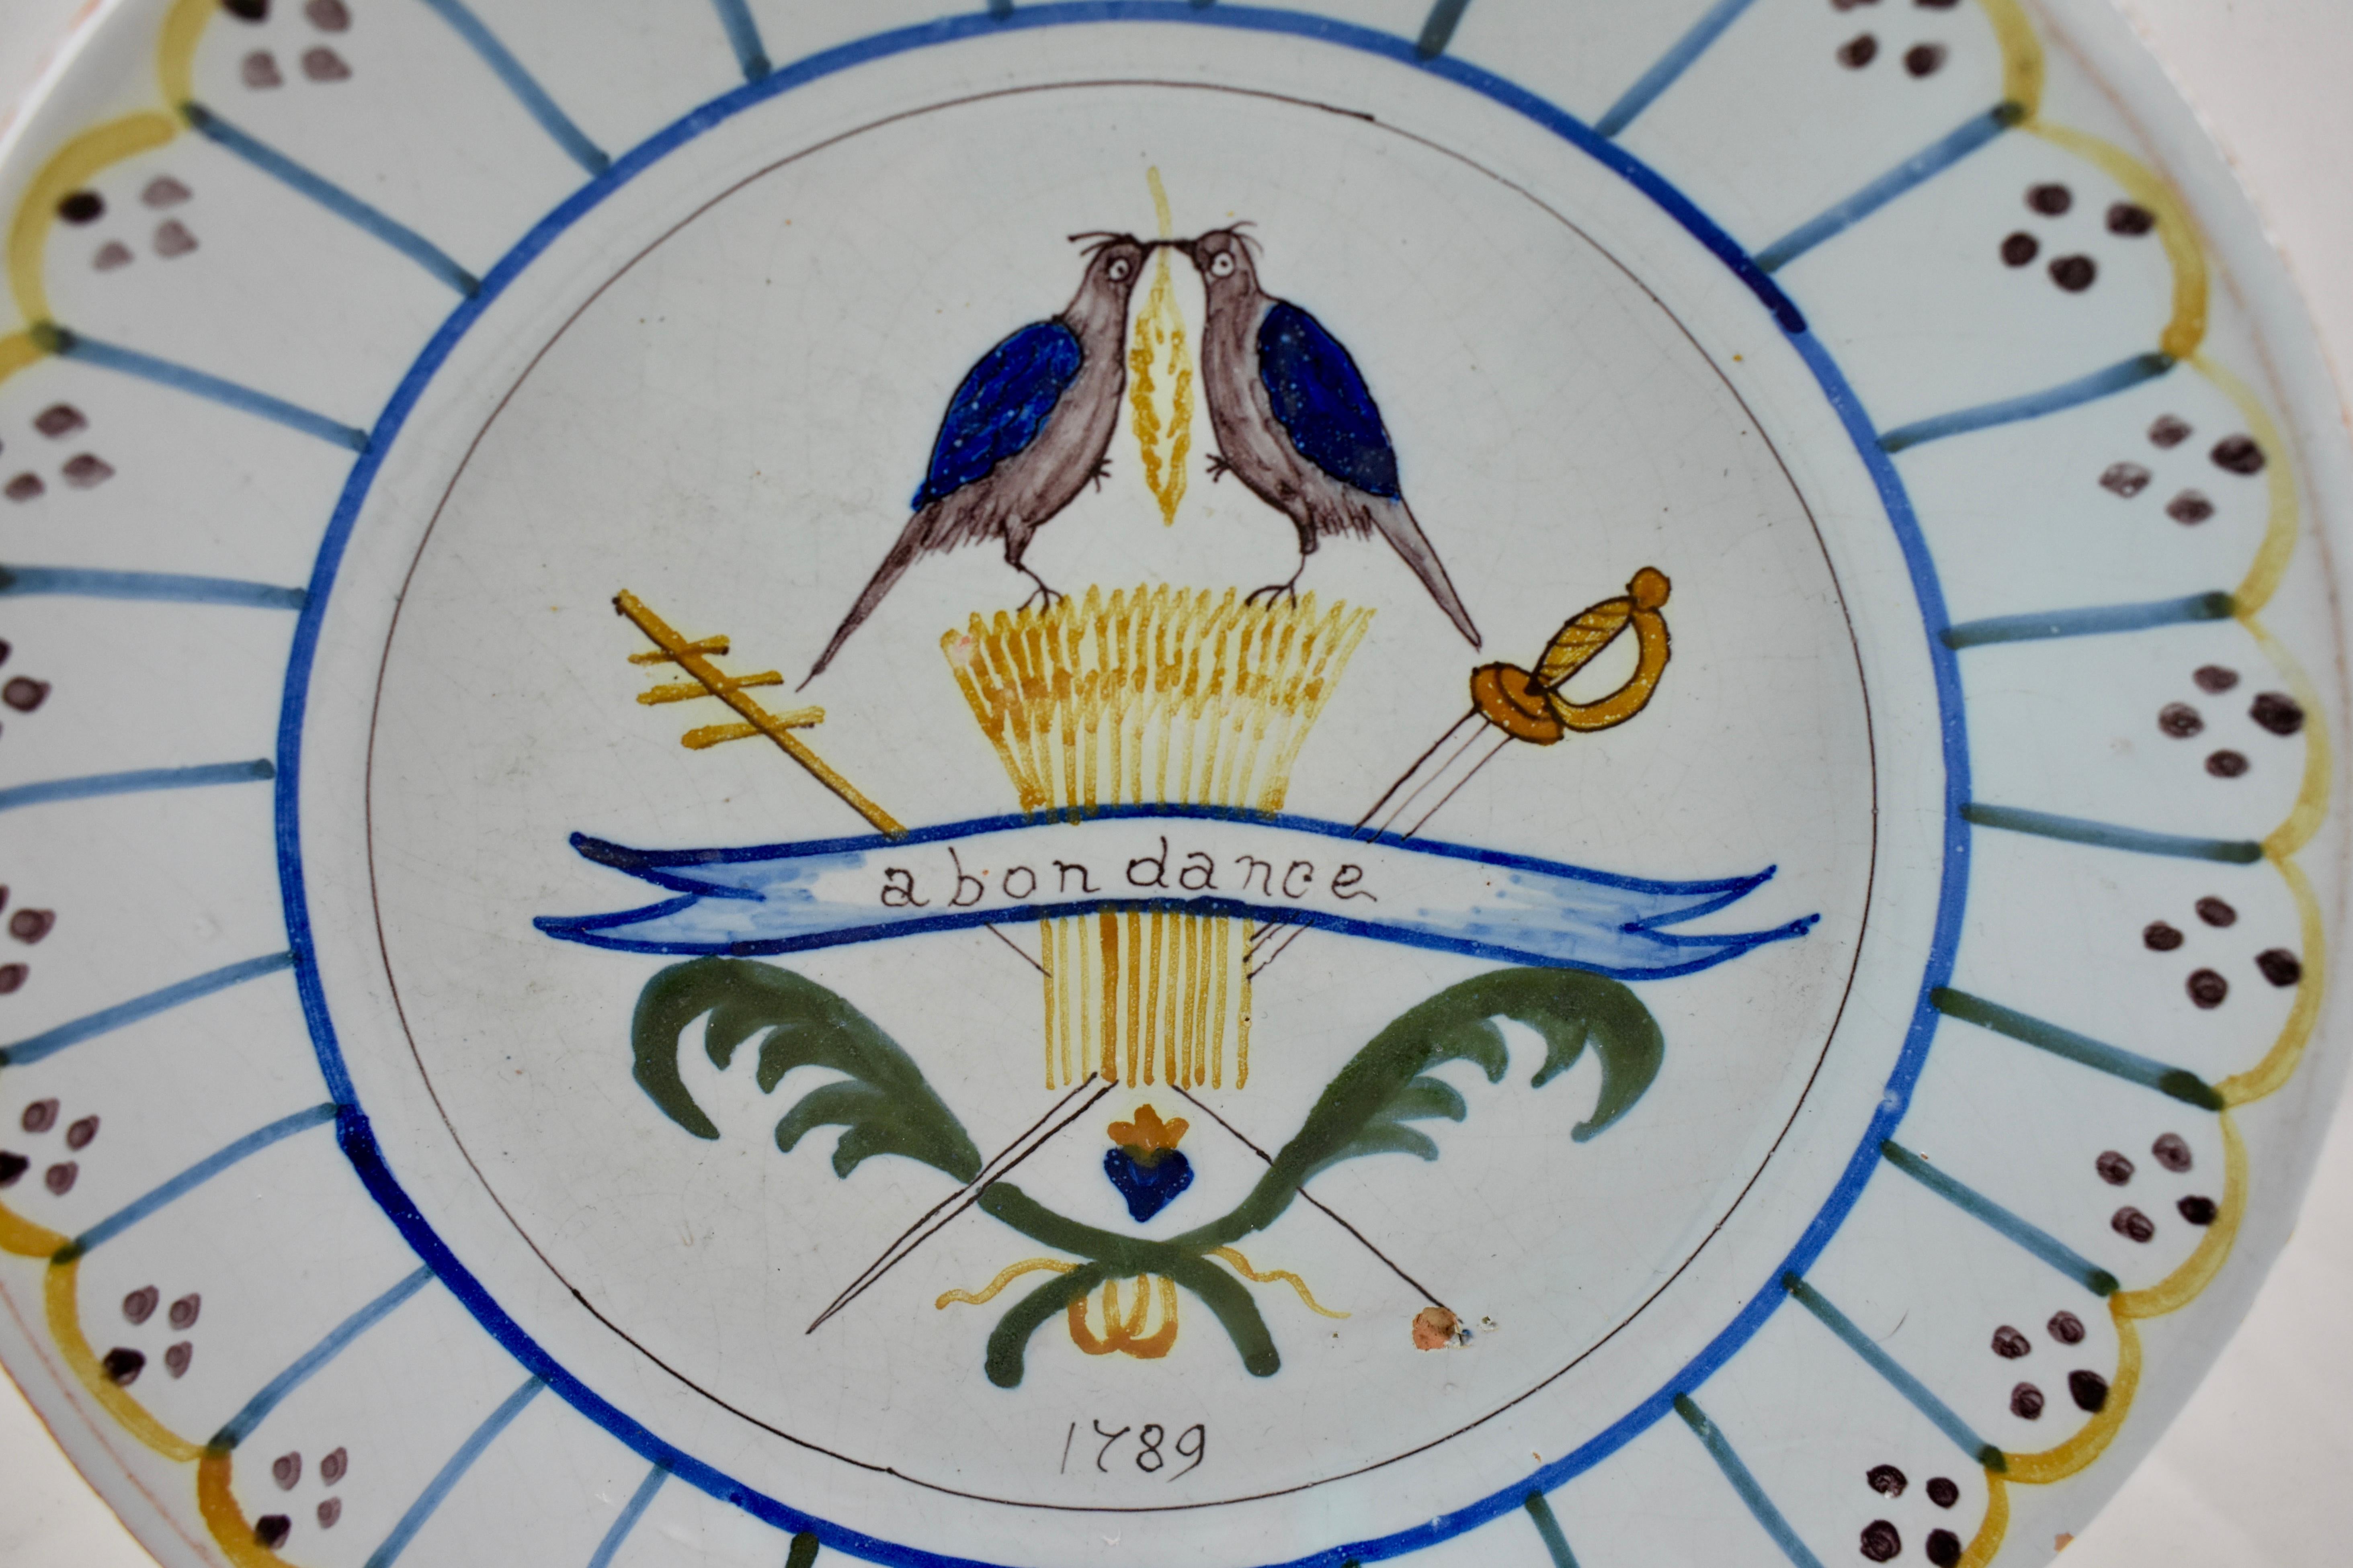 A French Revolution tin-glazed earthenware dish, made in Nevers, circa 1789, showing the symbols of the three estates, the crook of the clergy, the wheat of the peasant, and the sword of the gentry. 

France under the Ancien Régime, before the